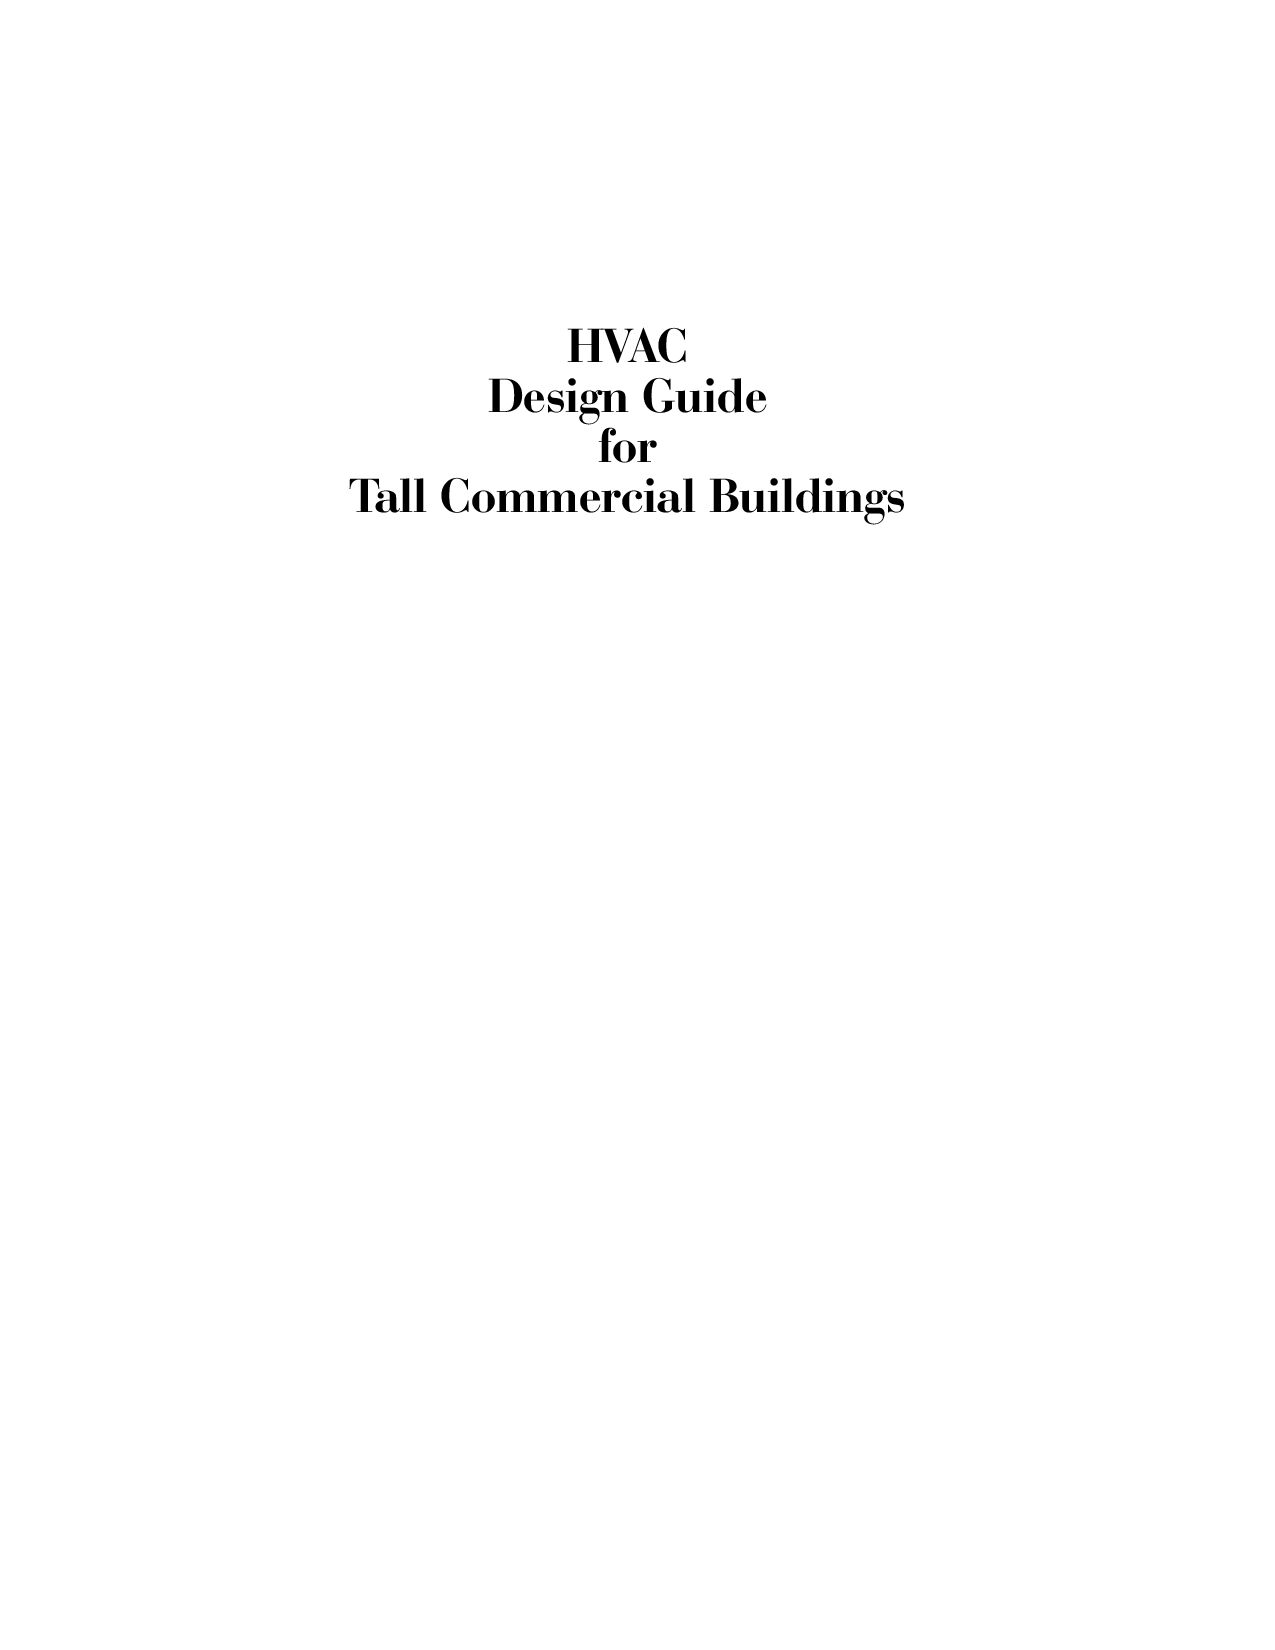 HVAC Design Guide for Tall Commercial Buildings 2004